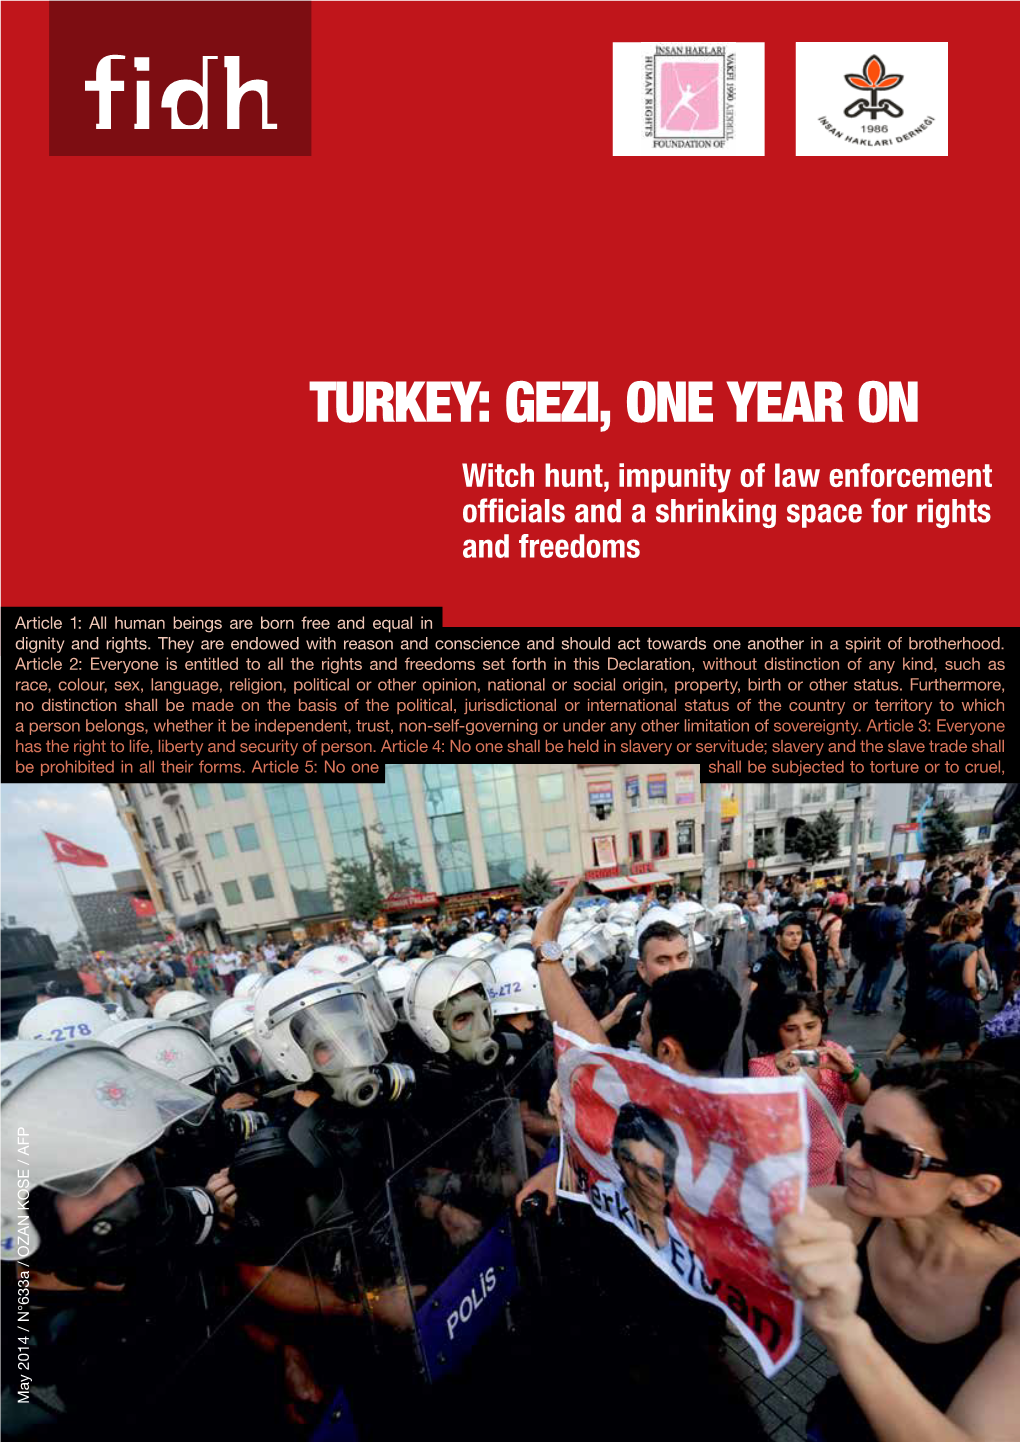 Turkey: Gezi, One Year on Witch Hunt, Impunity of Law Enforcement Officials and a Shrinking Space for Rights and Freedoms